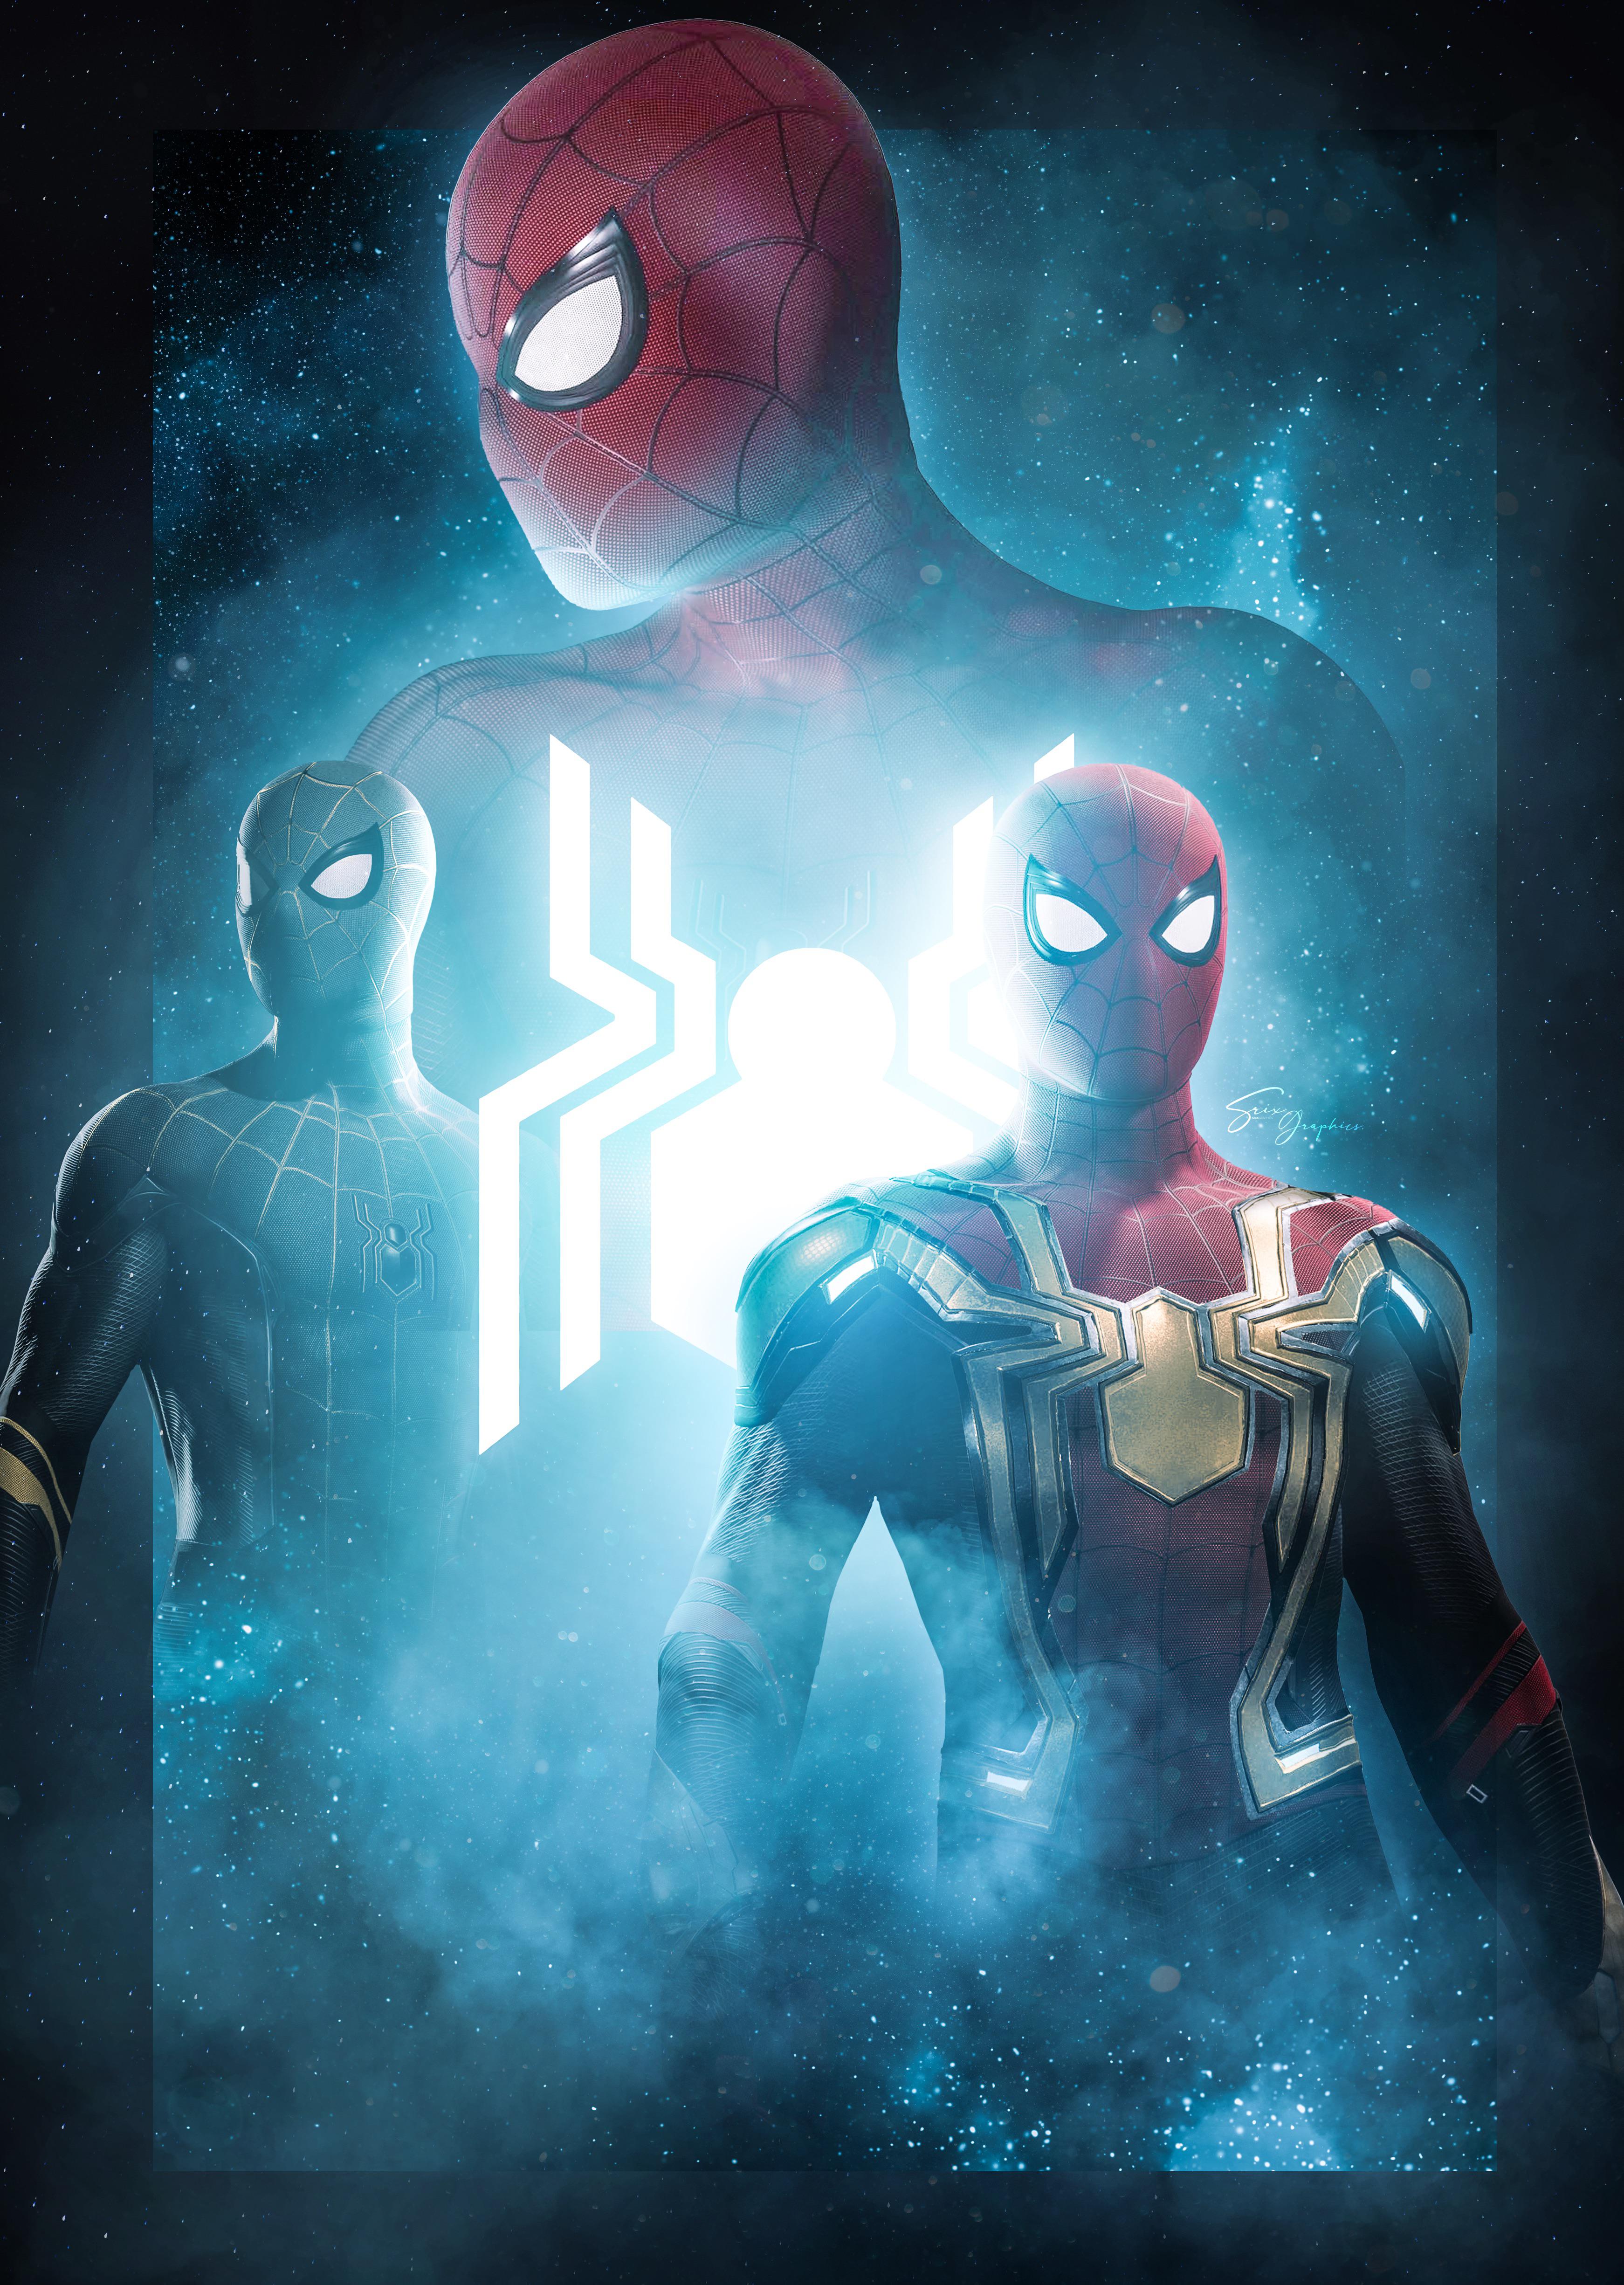 Spider Man NWH Fanart Showcasing The Three Suits We Will See (by Me)